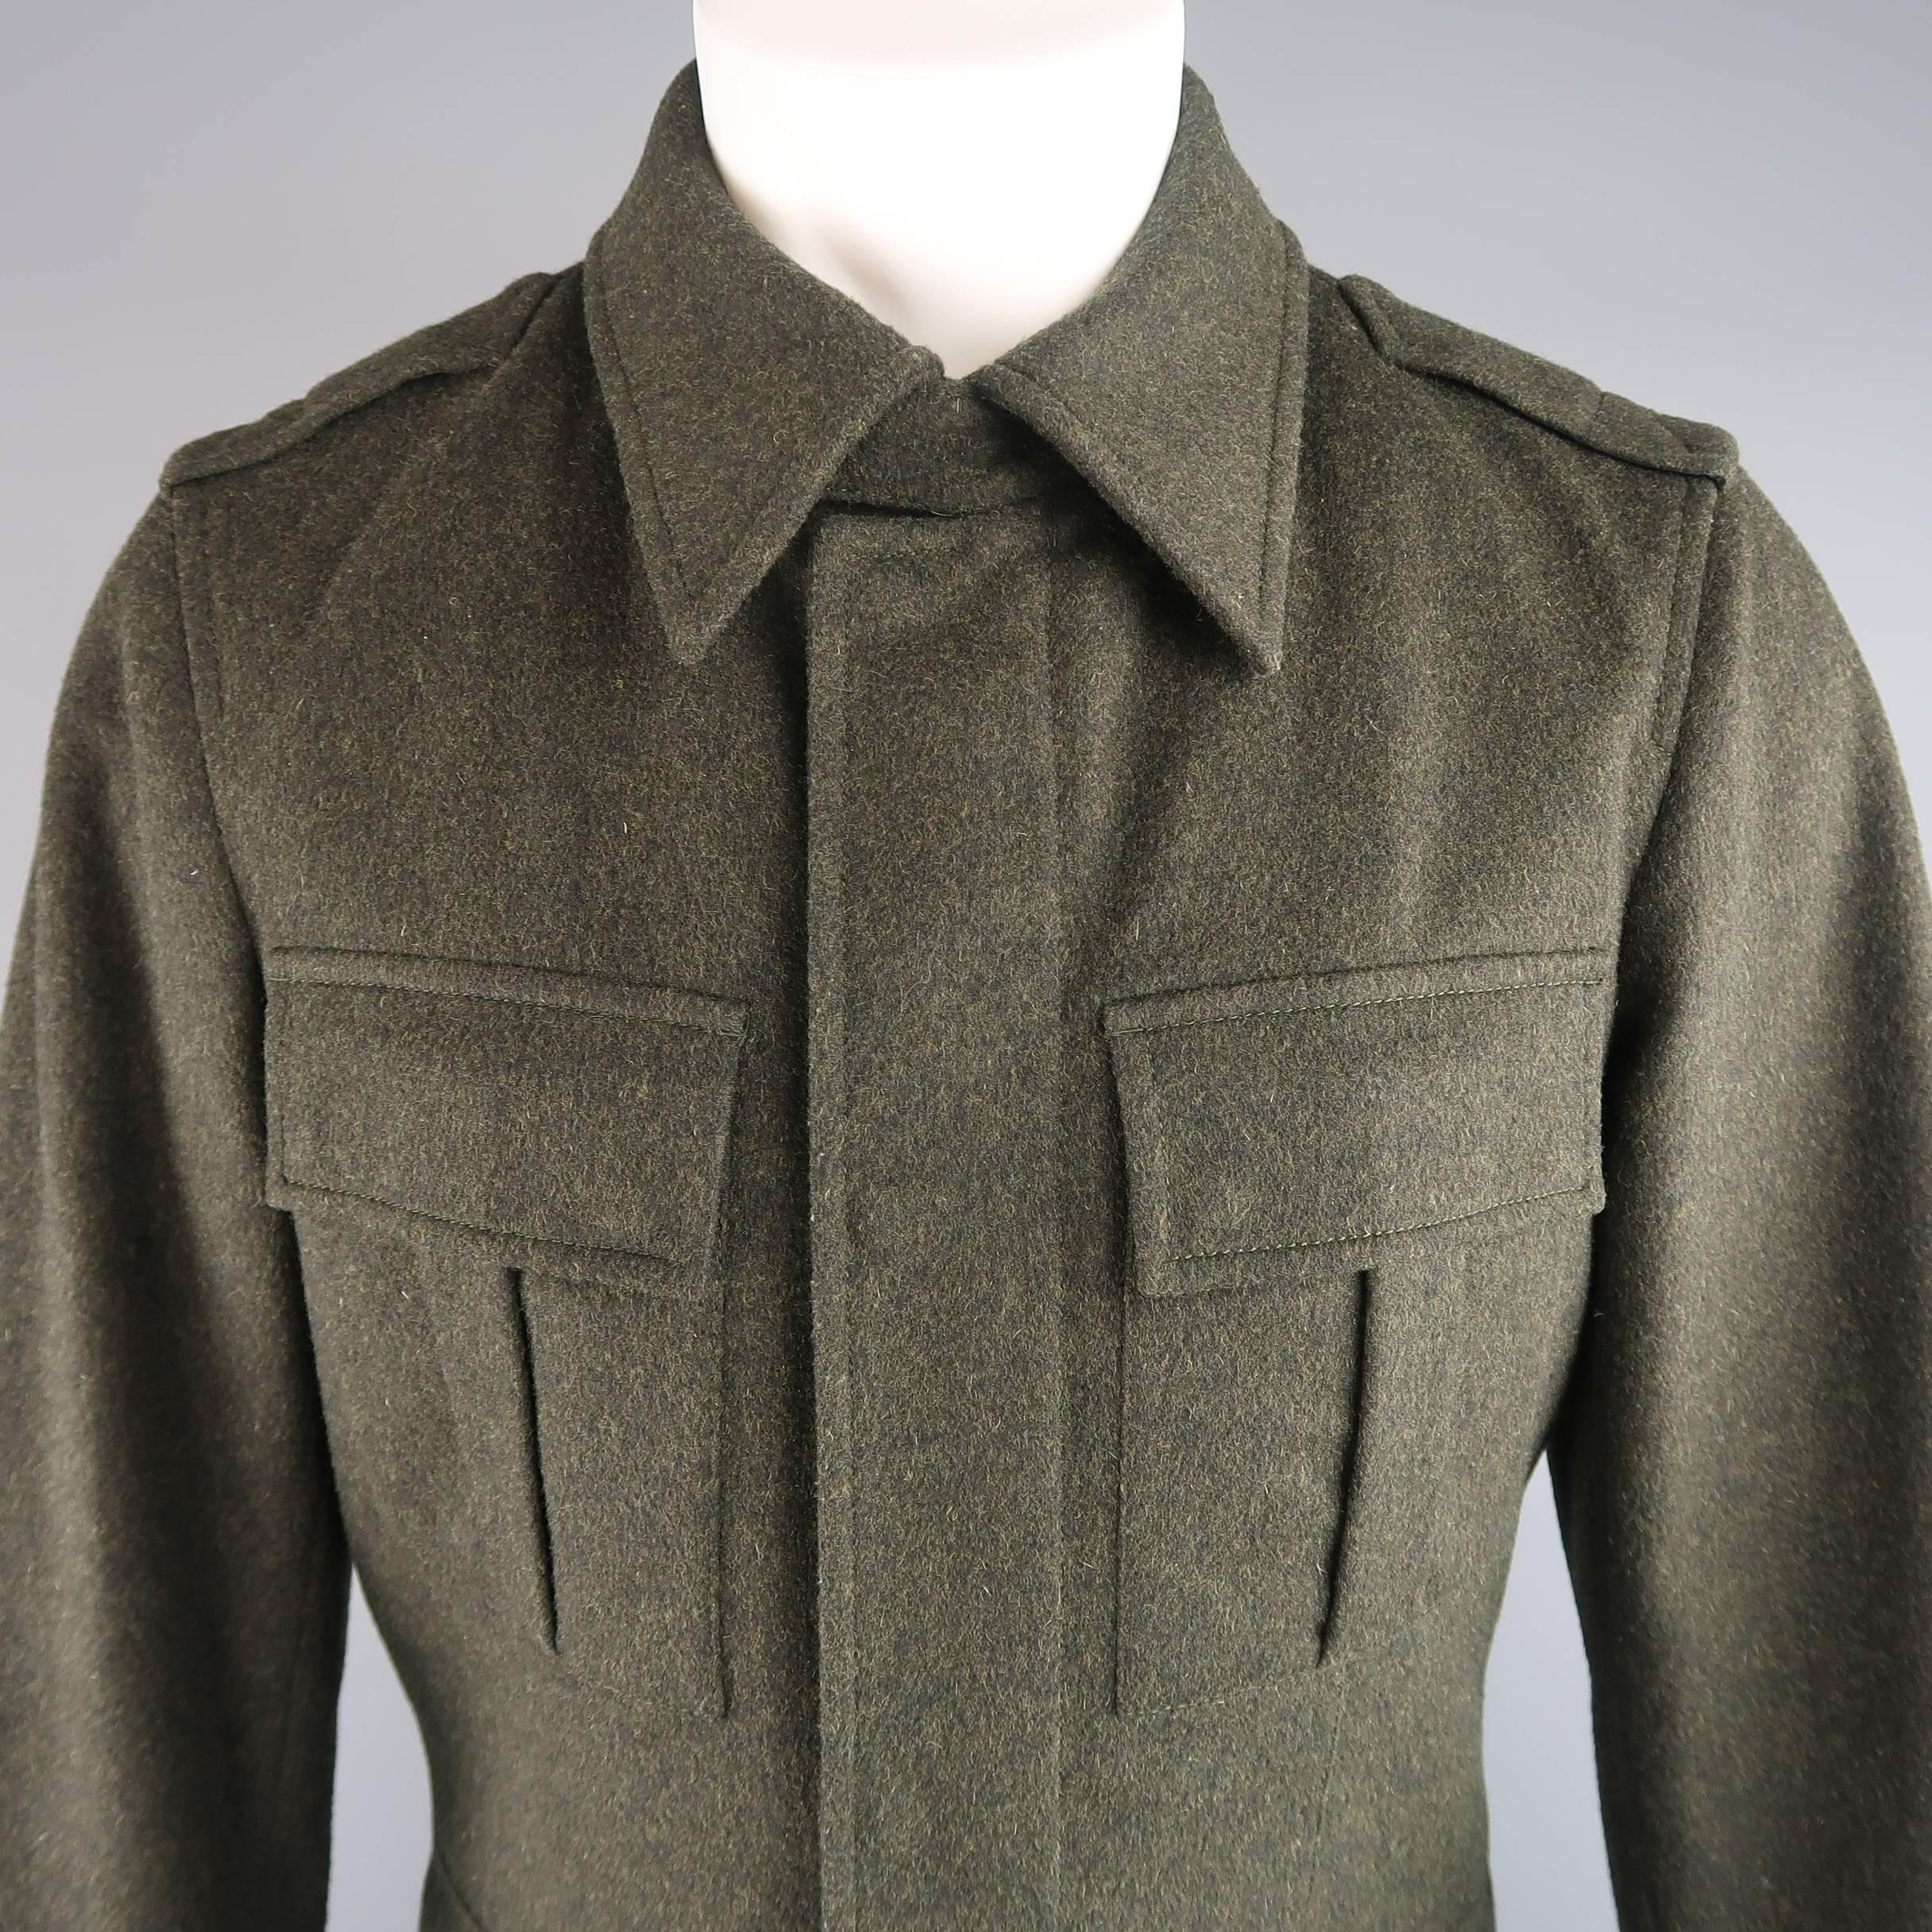 PRADA military style over coat comes in a heather textured green wool and features a pointed collar with snap tab, zip closure with hidden snap placket, patch flap pockets, epaulets, and nylon liner with extended cuffs. Care tags removed. As-Is.